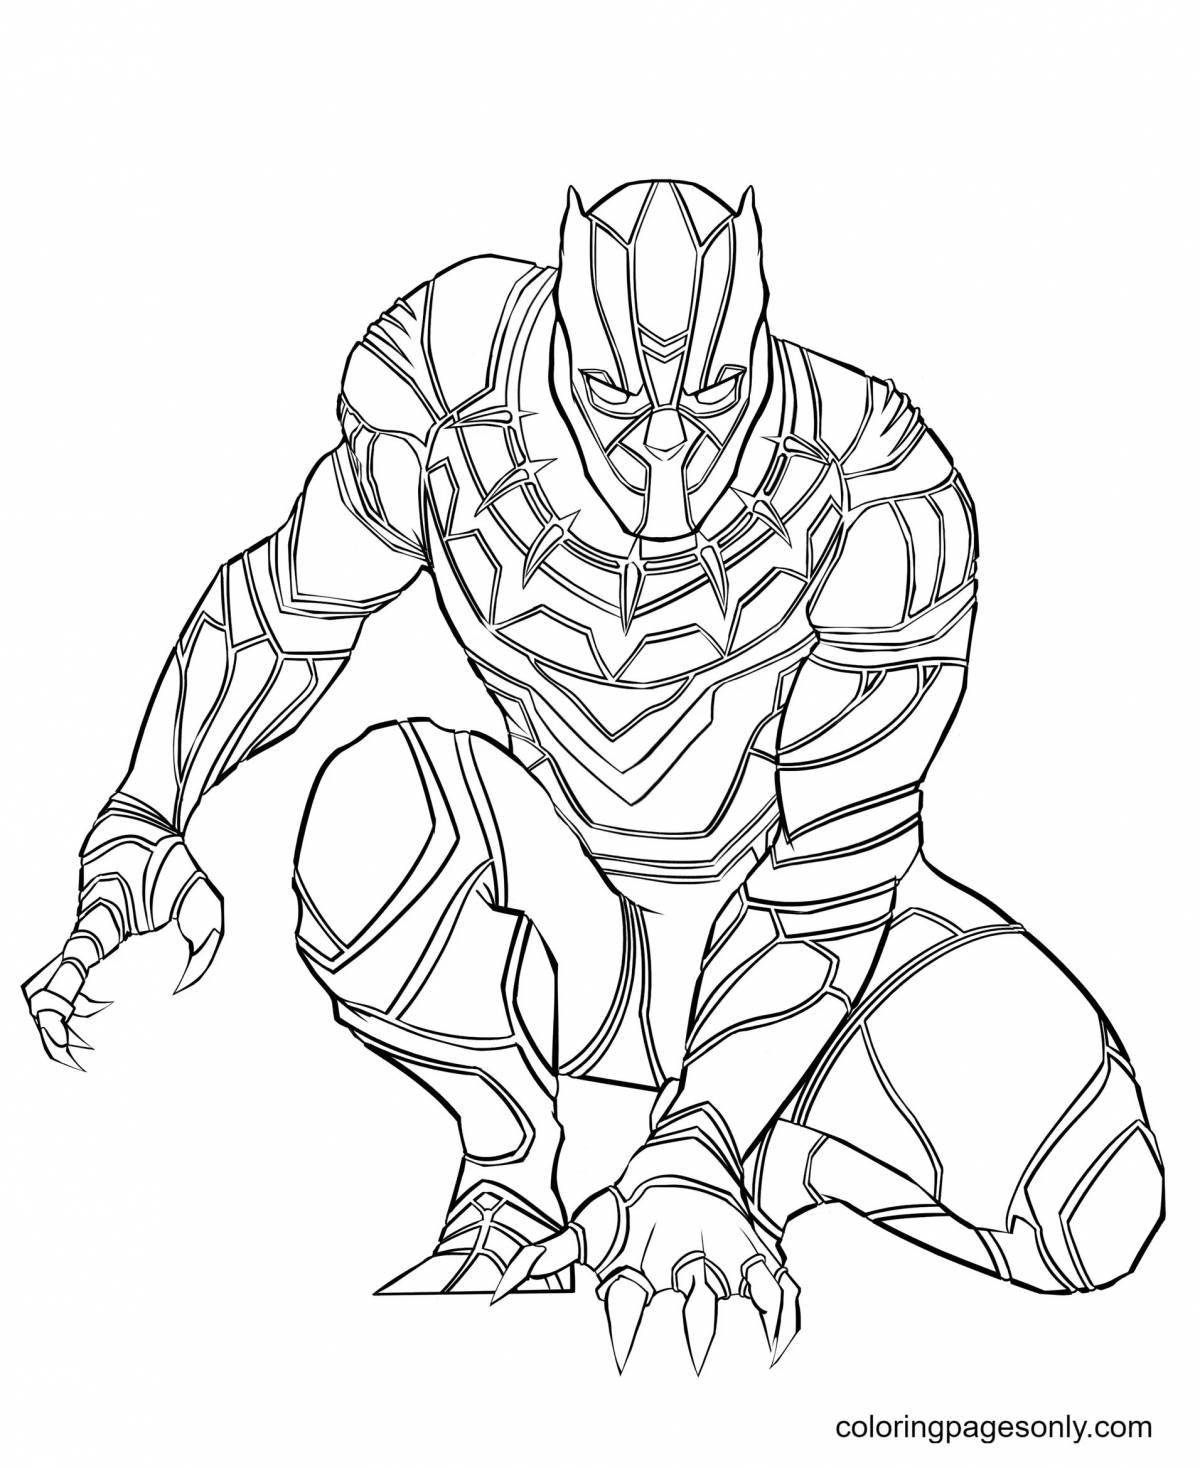 Exciting marvel panther coloring page